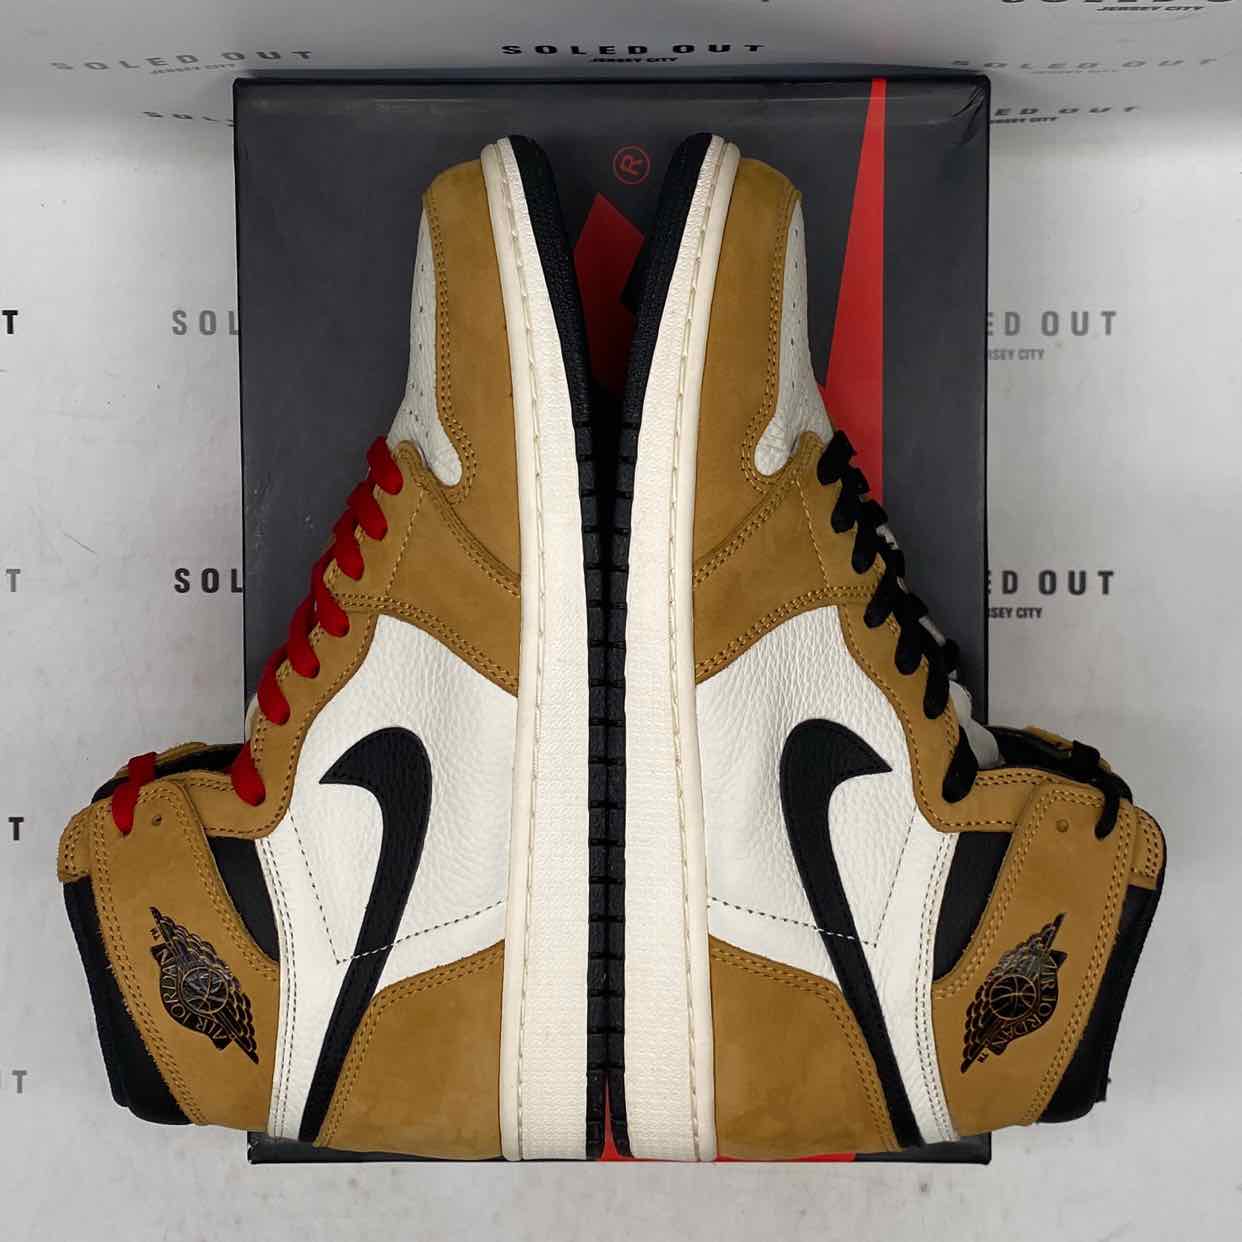 Air Jordan 1 Retro High OG "Rookie Of The Year" 2018 Used Size 11